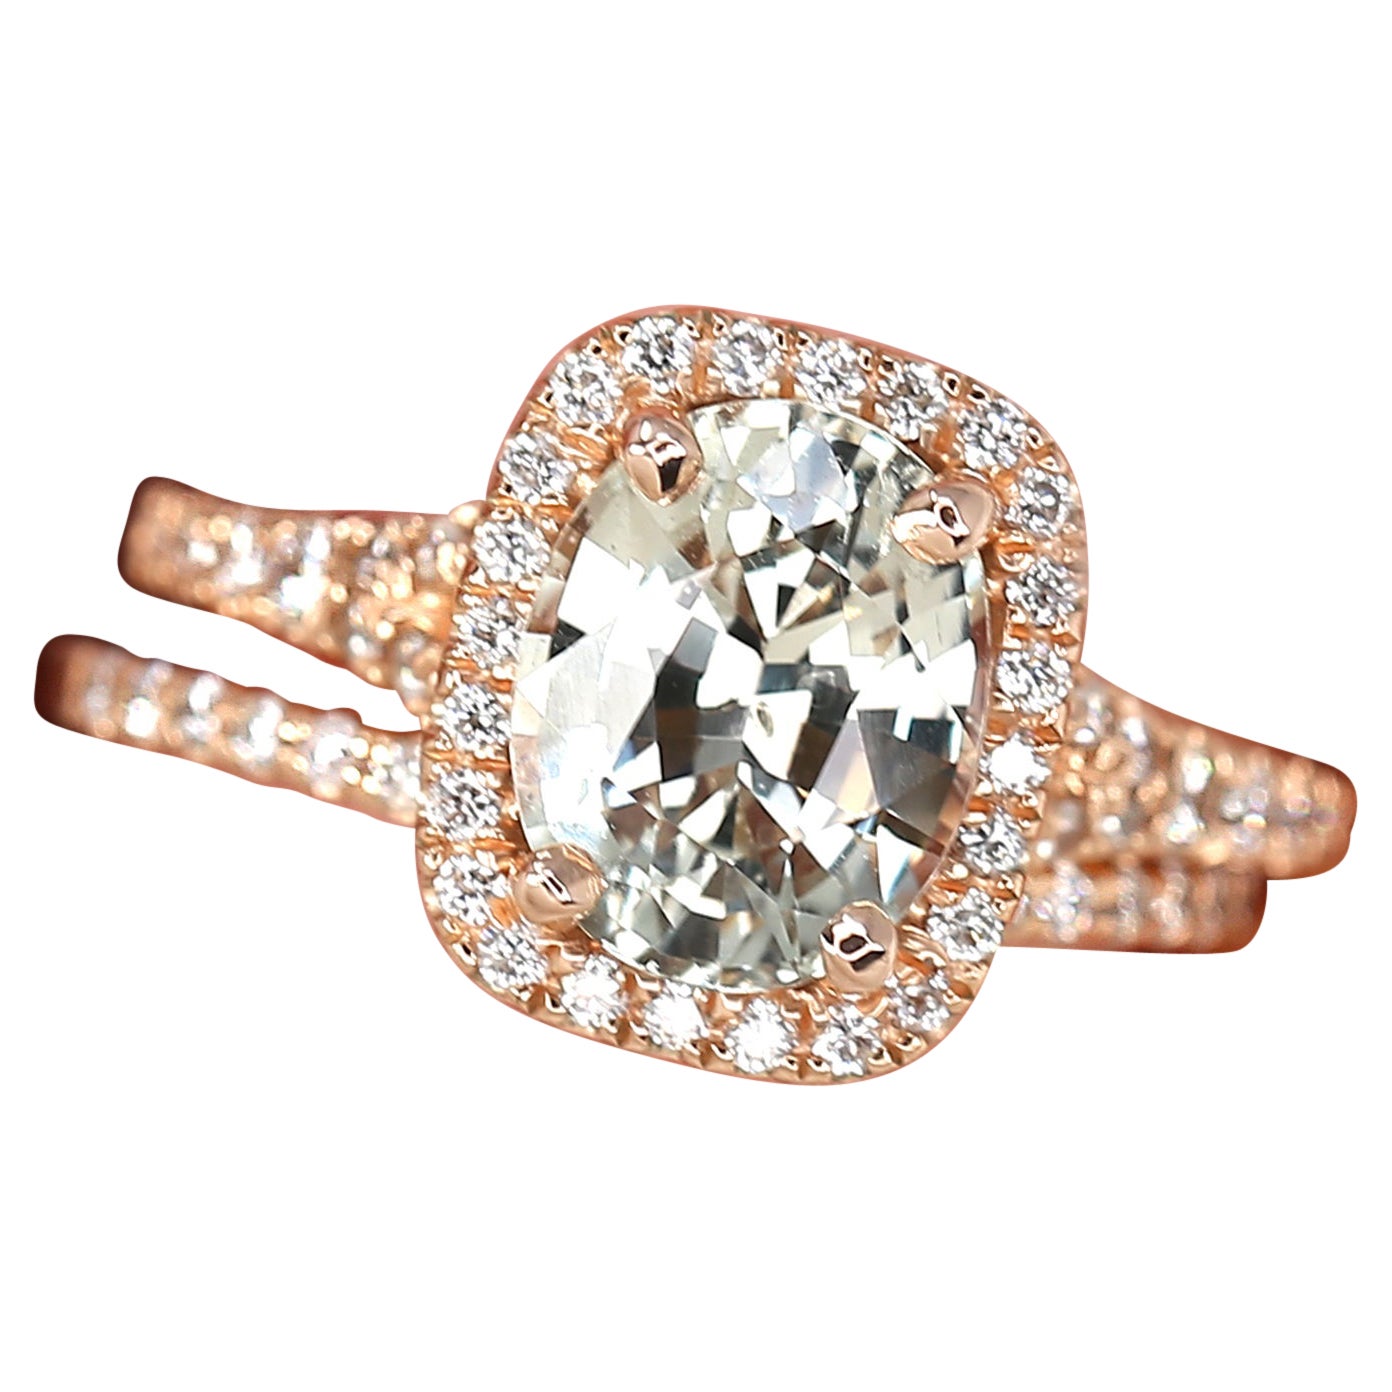 Discover our enchanting peach champagne sapphire halo ring with a mermaid split shank design. Featuring an ethically sourced sapphire, this unique ring is adorned with dainty pave fair trade diamonds that is handcrafted by expert artisans from